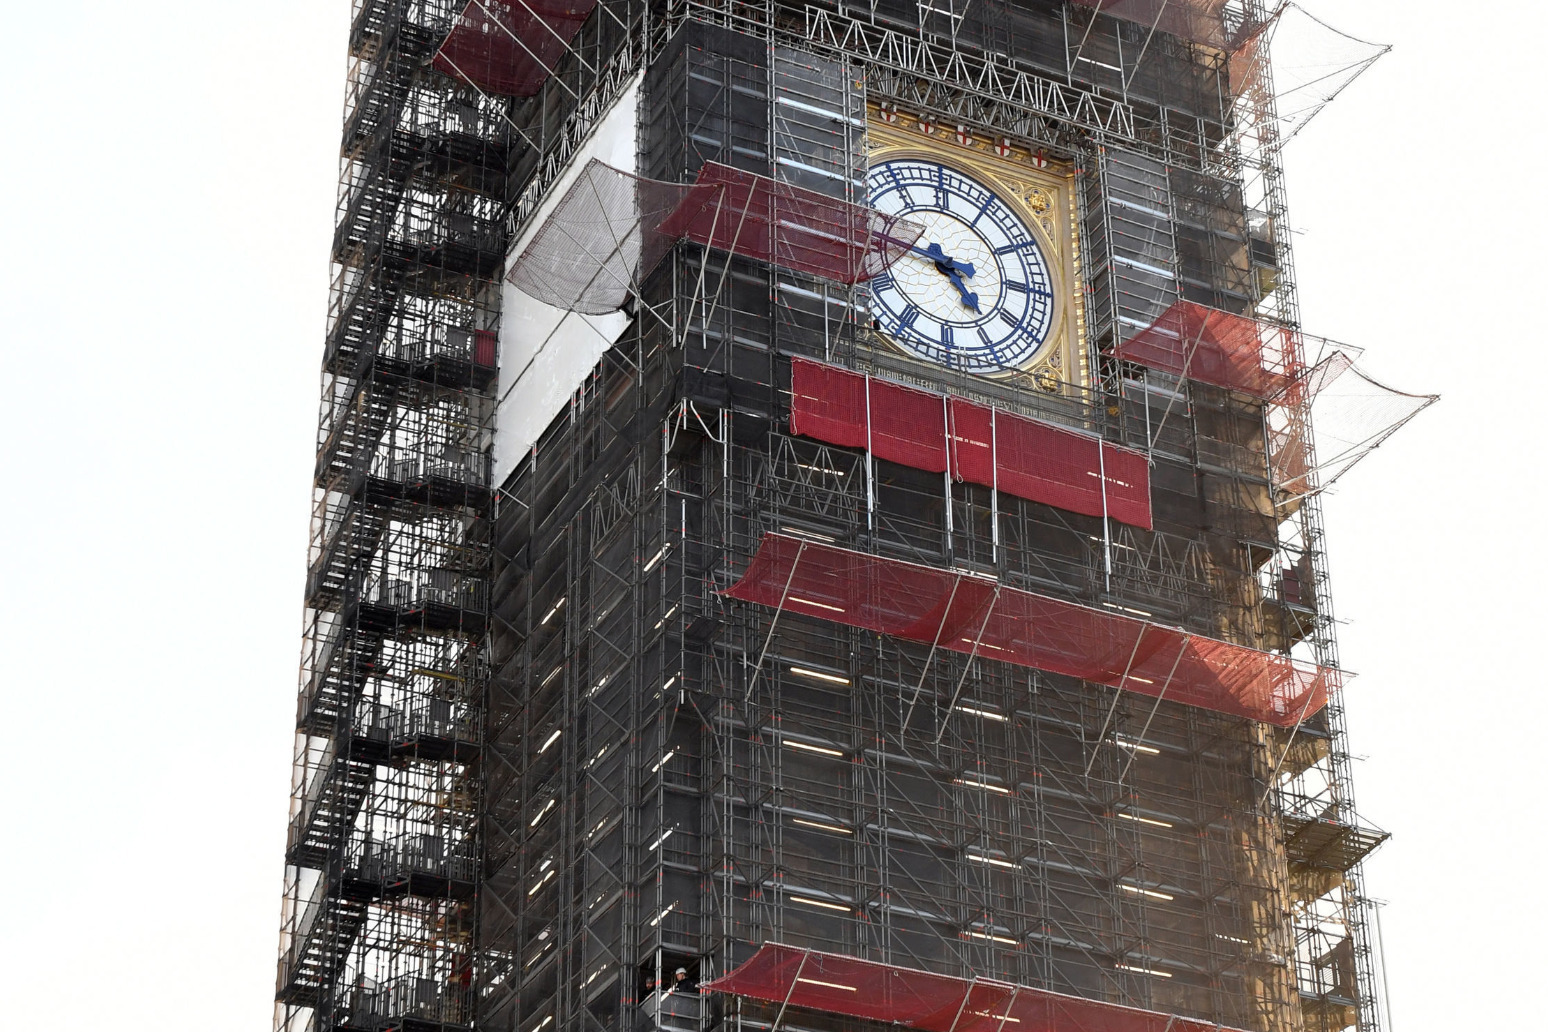 Another £18m needed for repair work to the tower housing Big Ben 